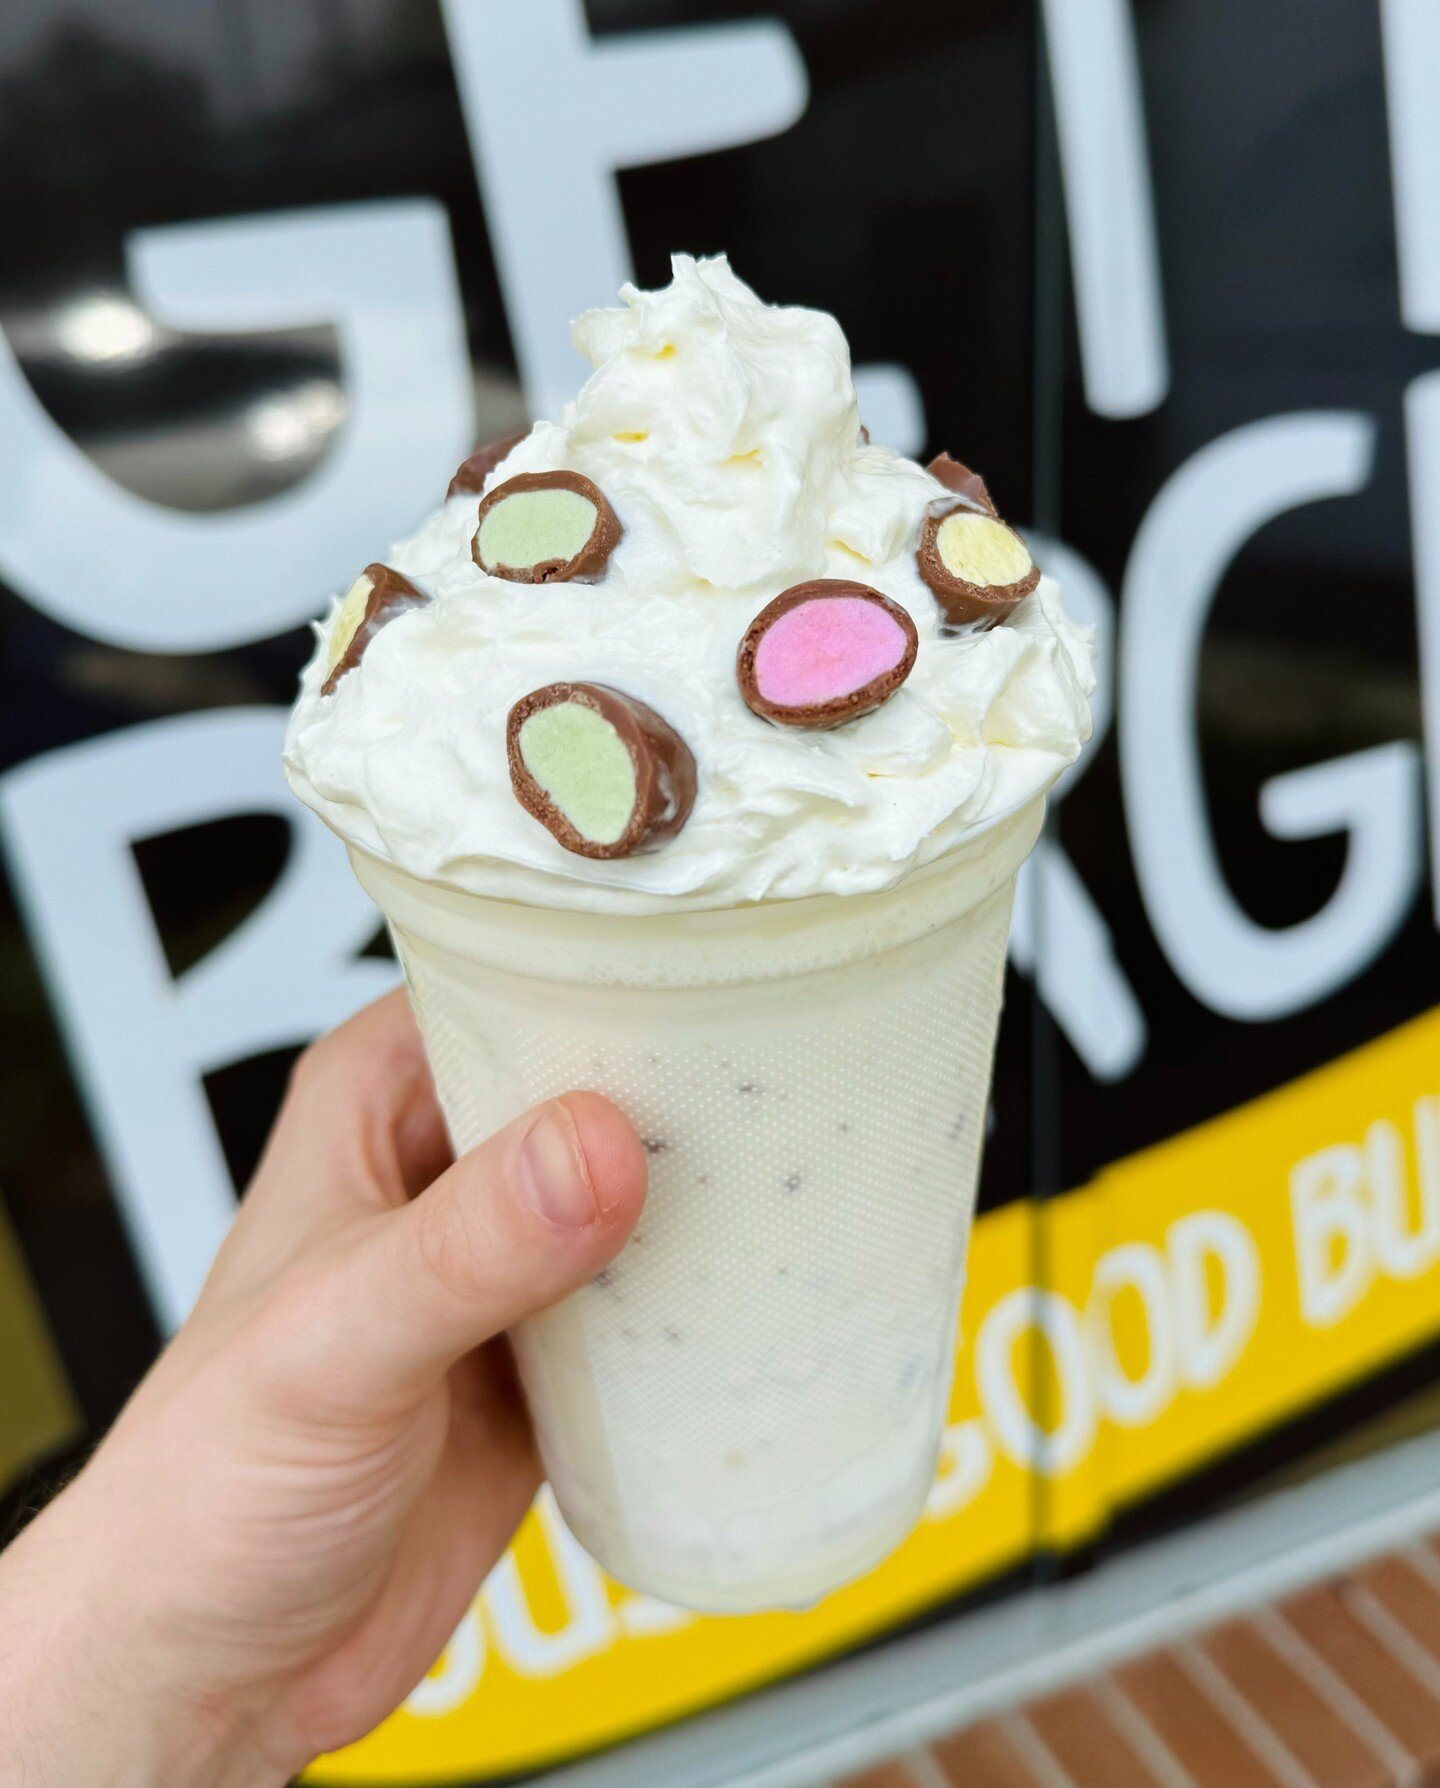 The Getta Clinkers Thick shake Monthly Special is now in full swing 🤤🥛🍫. If you have a sweet tooth and enjoy a flavour blast from the past&hellip; this creation was made for you. Available from now and in all stores until sold out! Get in quick.
.